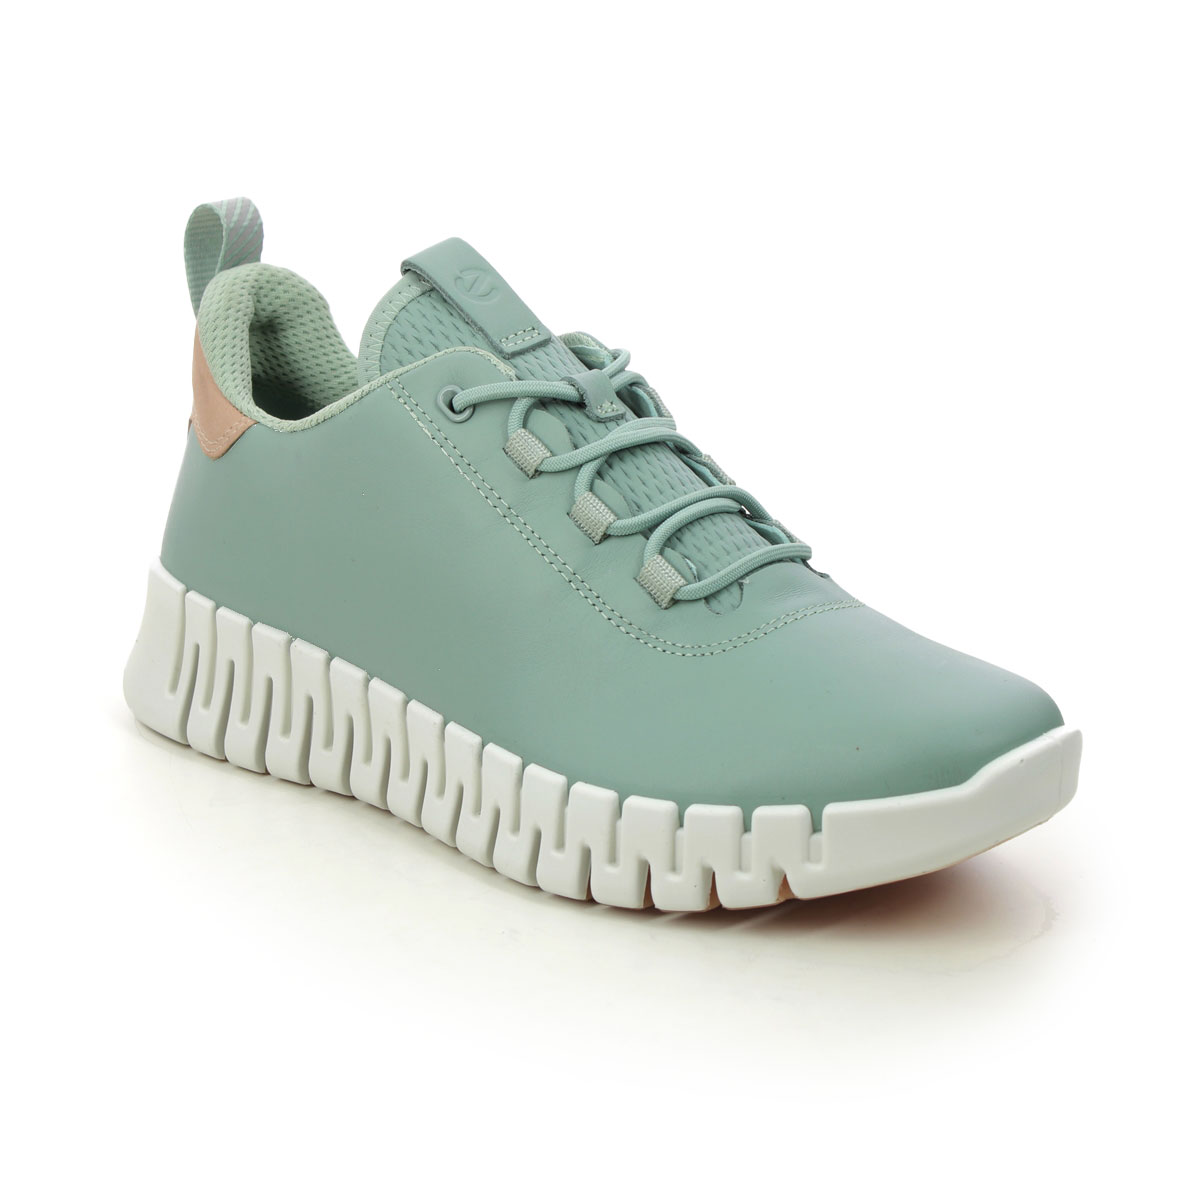 ECCO Gruuv Womens Aqua Womens trainers 218203-60701 in a Plain Leather in Size 37